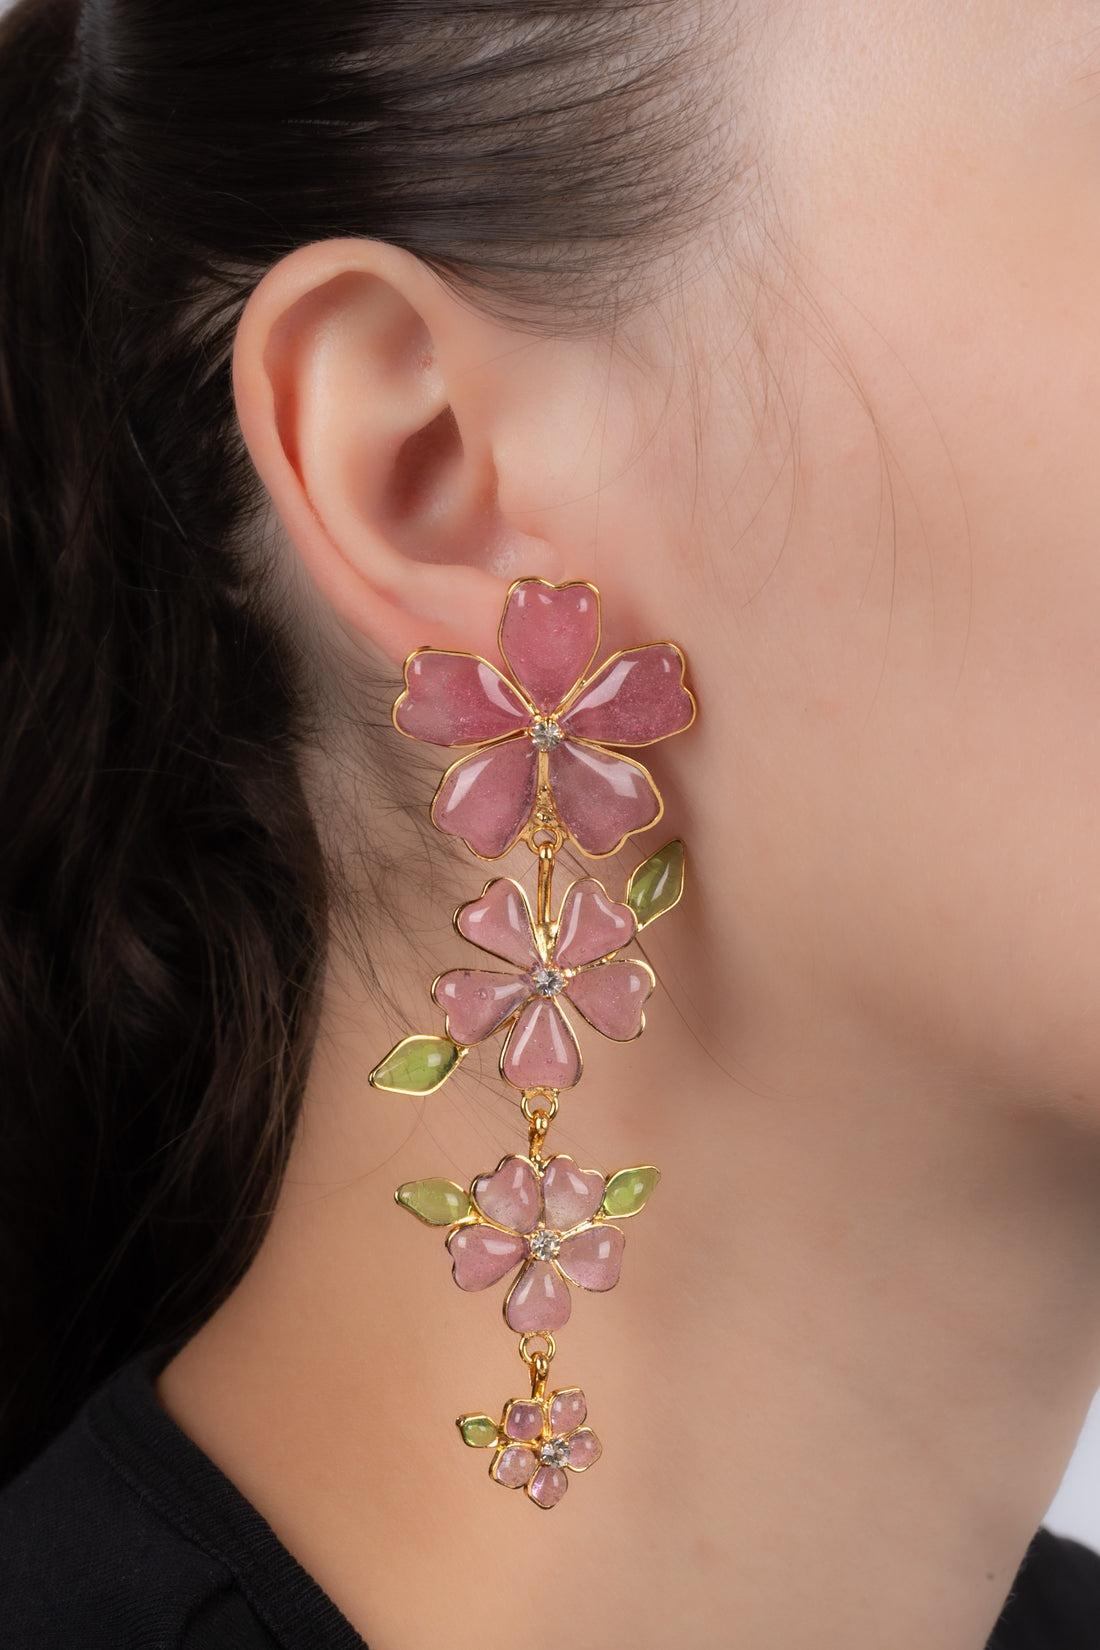 Augustine - Golden metal earrings with pink transparent glass paste.

Additional information:
Condition: Very good condition
Dimensions: Length: 9.5 cm

Seller Reference: BO250